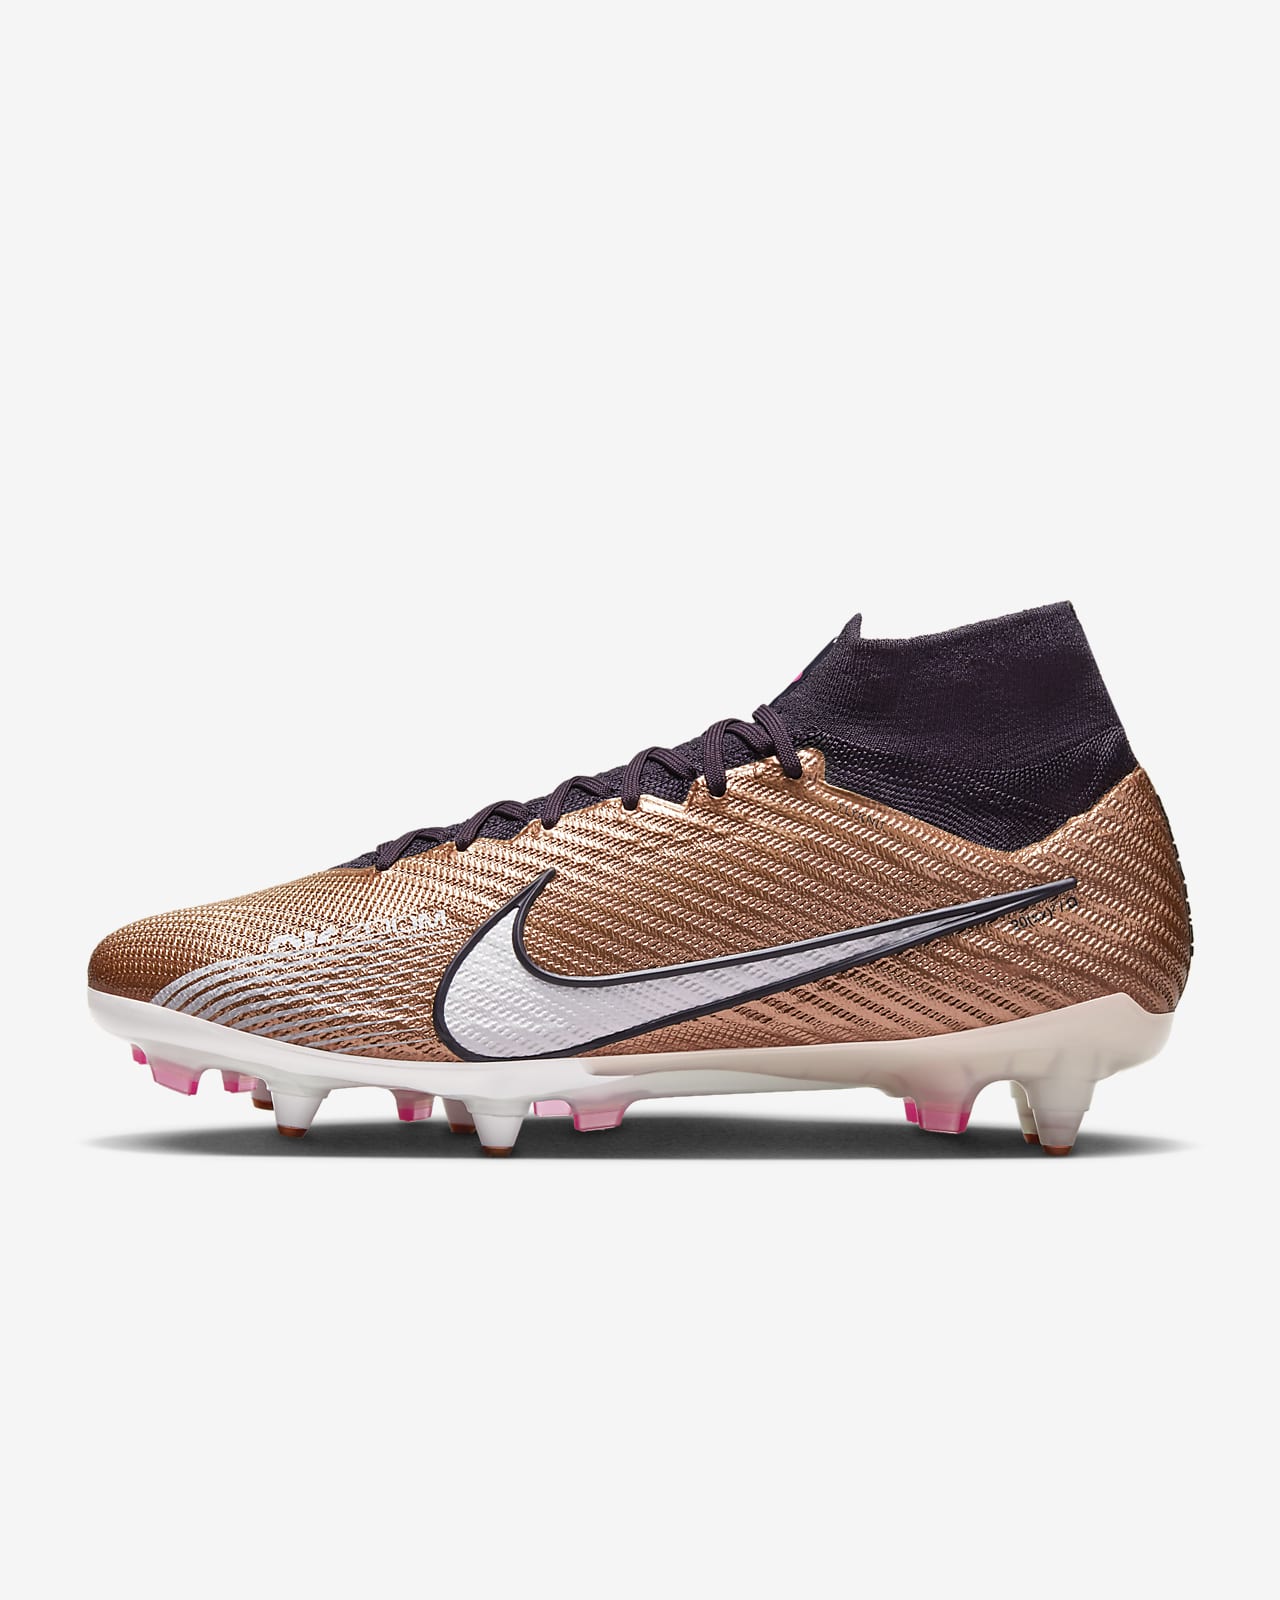 Nike Zoom Mercurial Superfly 9 Elite SG-Pro Anti-Clog Traction Soft-Ground Football Boot